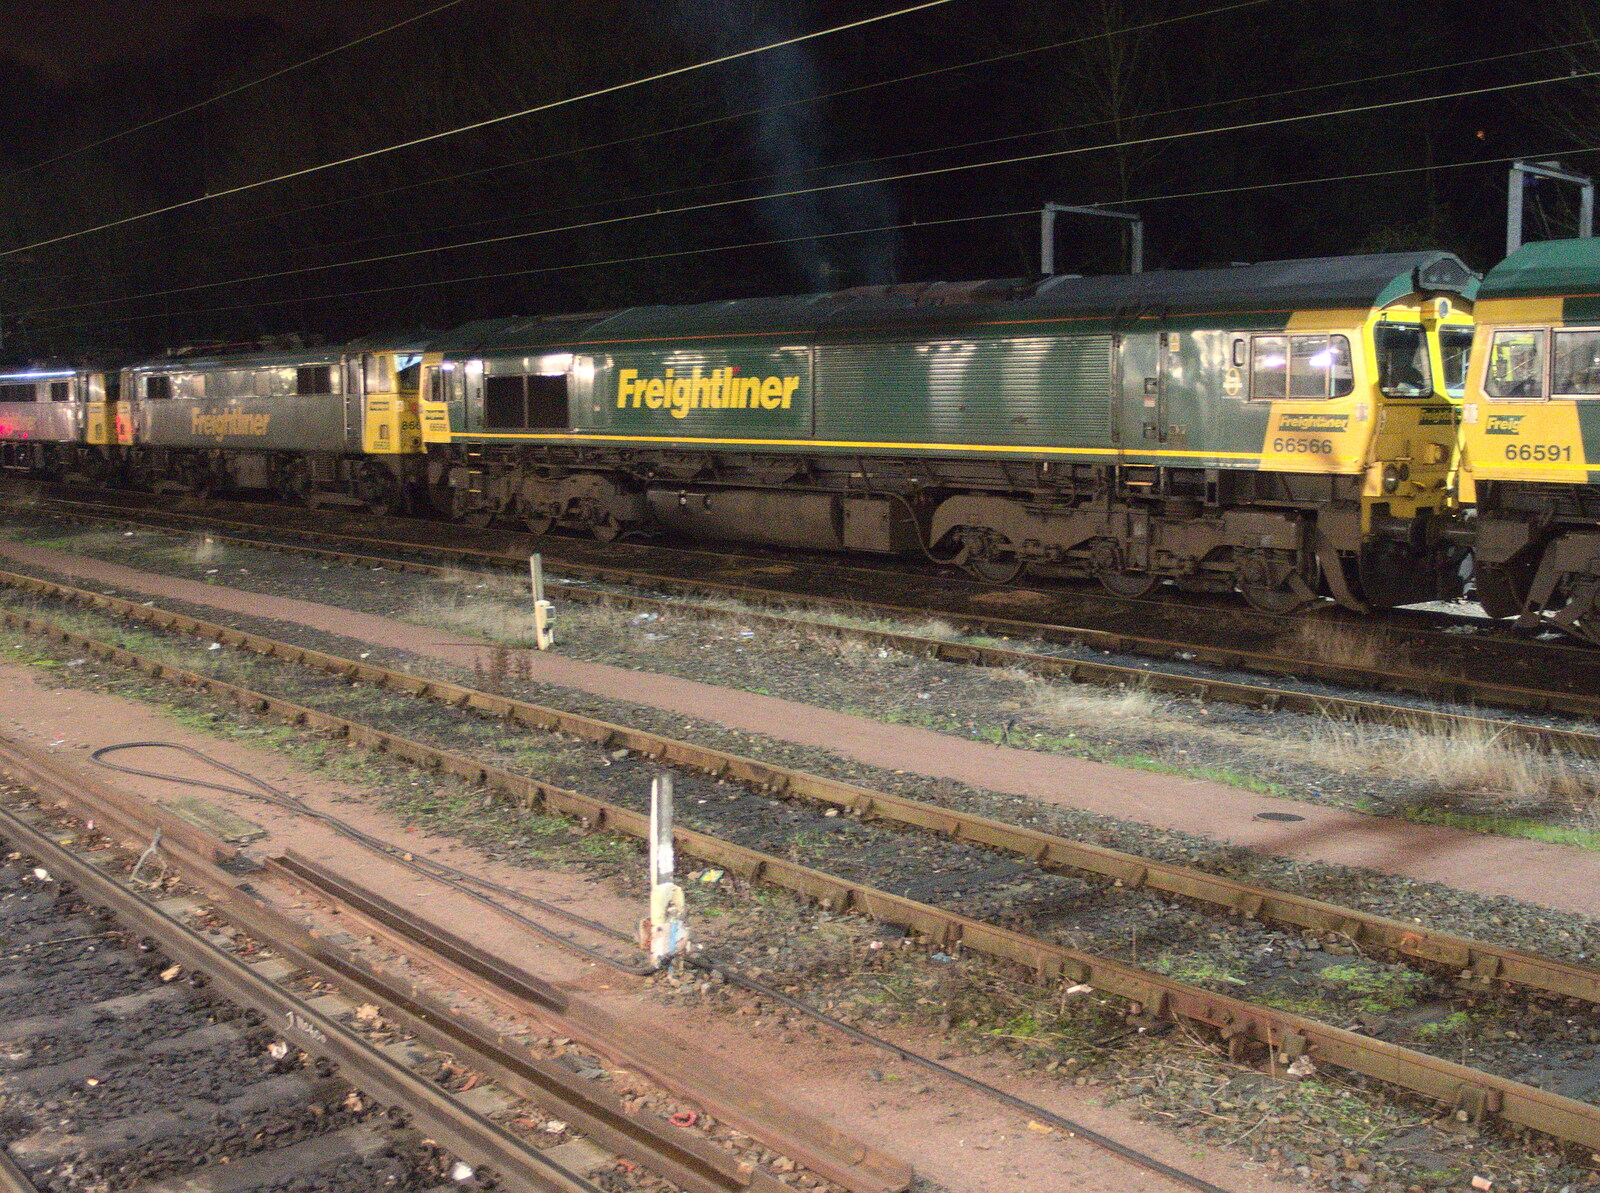 A couple of Class 66 'sheds' from Isobel Goes to Lyon, Ipswich Station, Burrell Road - 24th January 2016